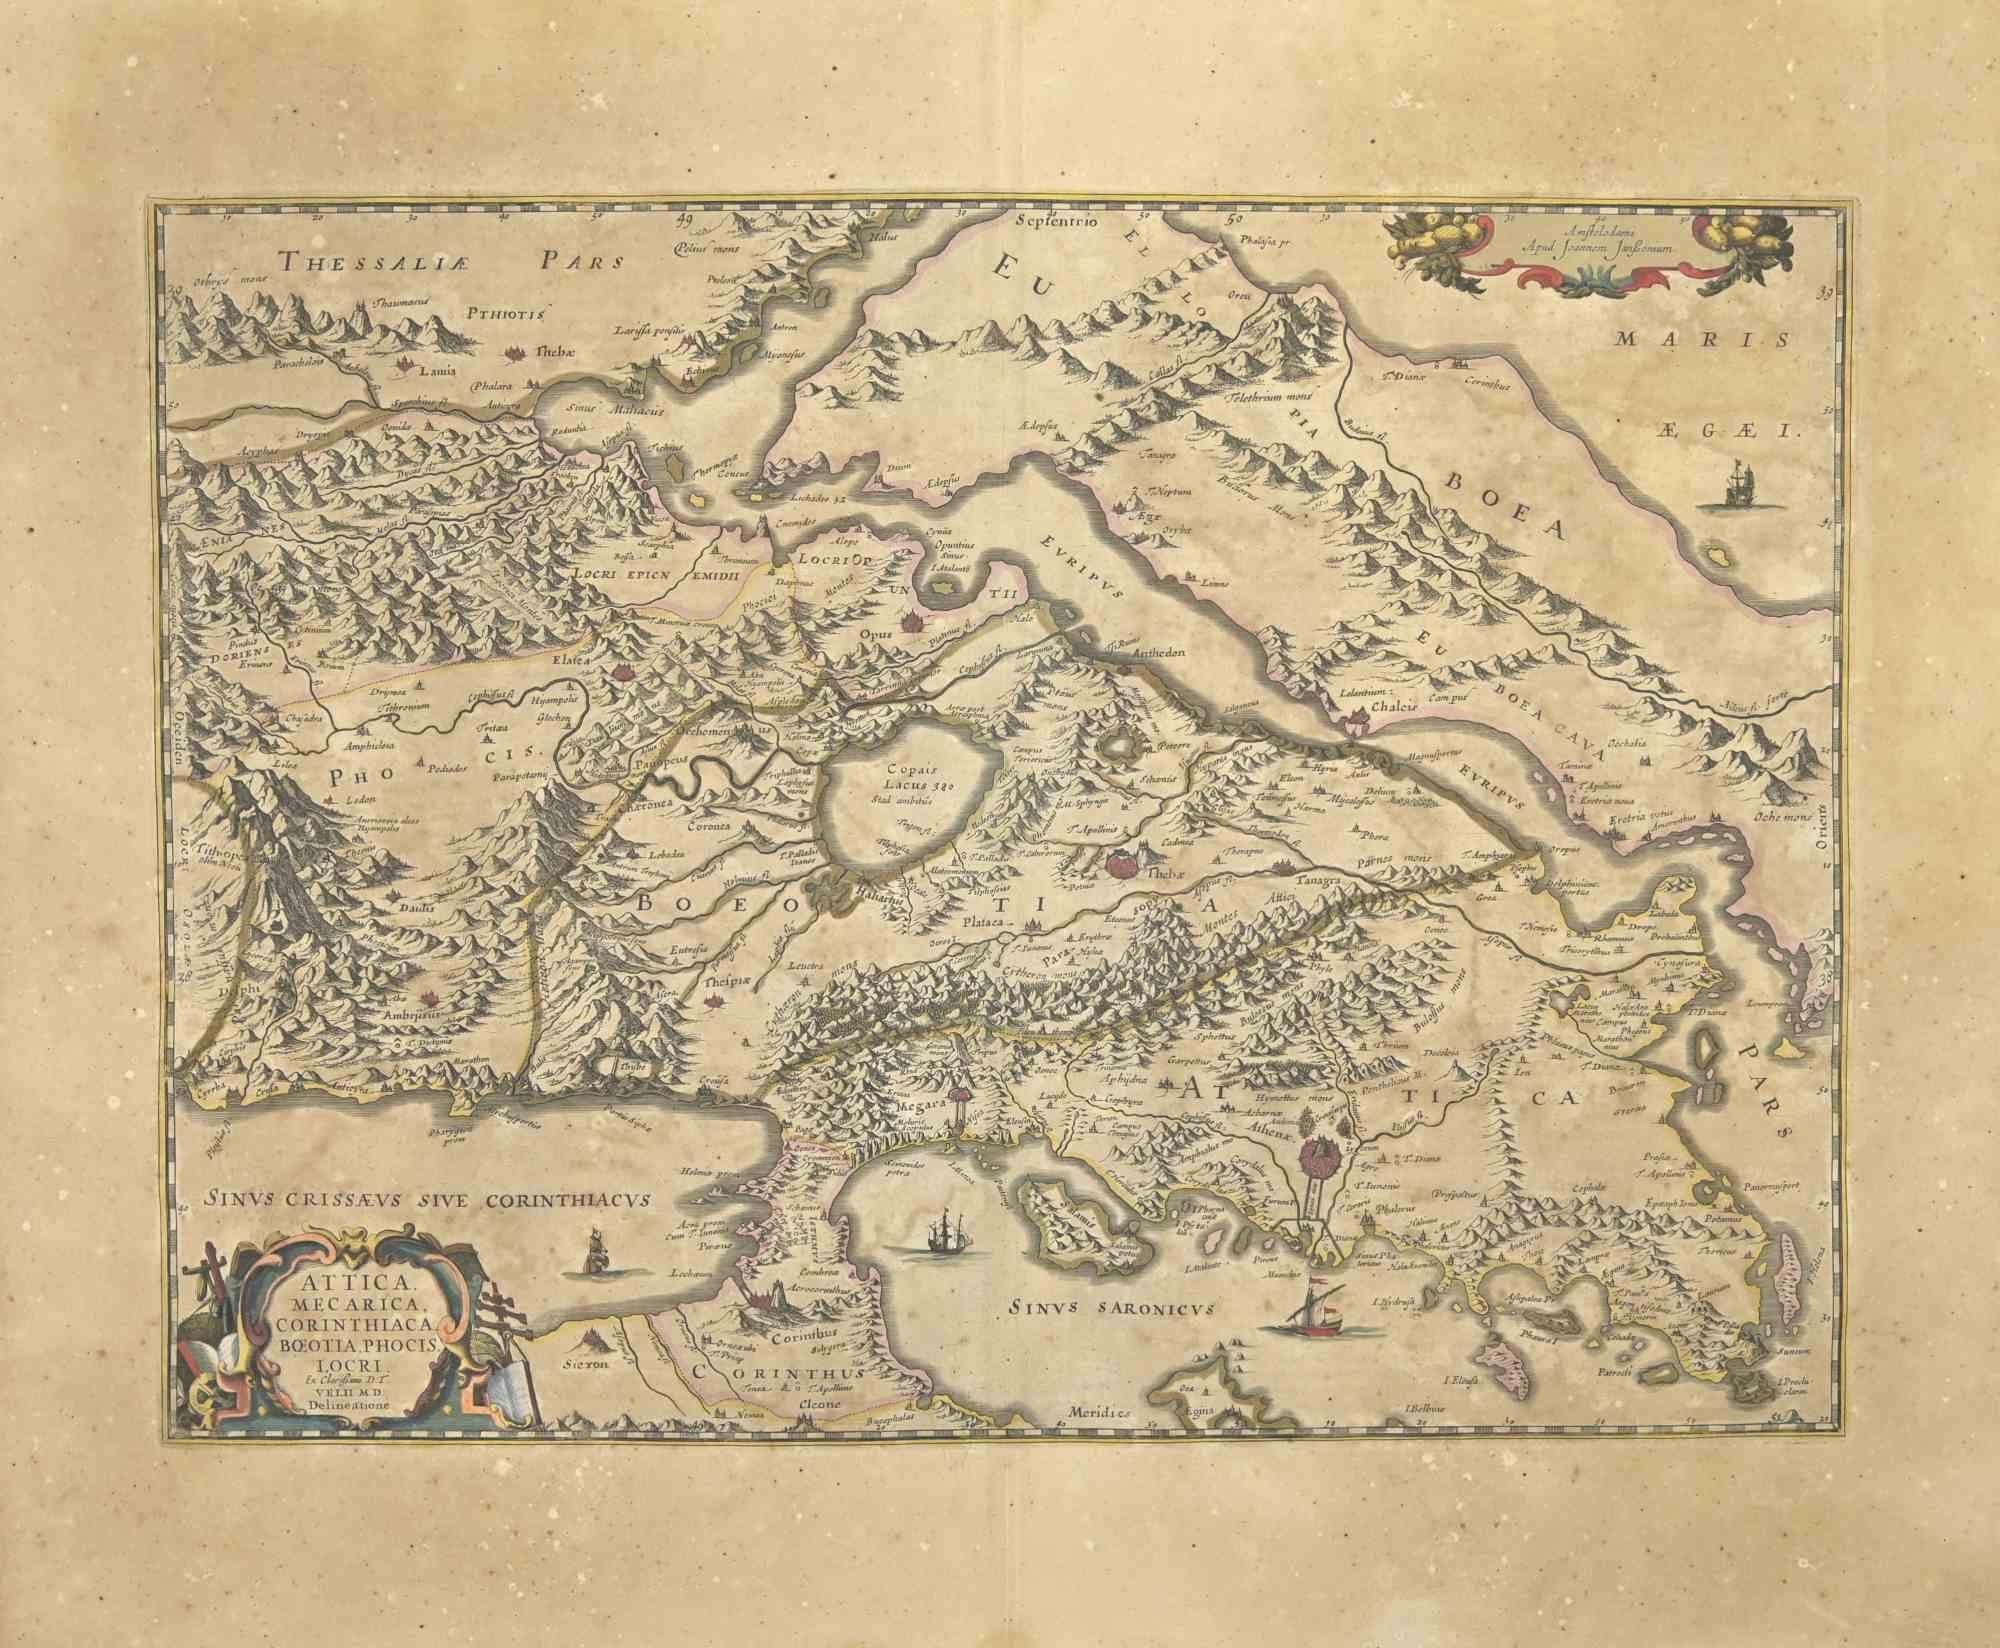 Antique Map - Attica is an antique map realized in 1650 by Johannes Janssonius (1588-1664).

The Map is Hand-colored etching, with coeval watercoloring.

Good conditions with slight foxing.

From Atlantis majoris quinta pars, Orbem maritimum [Novus